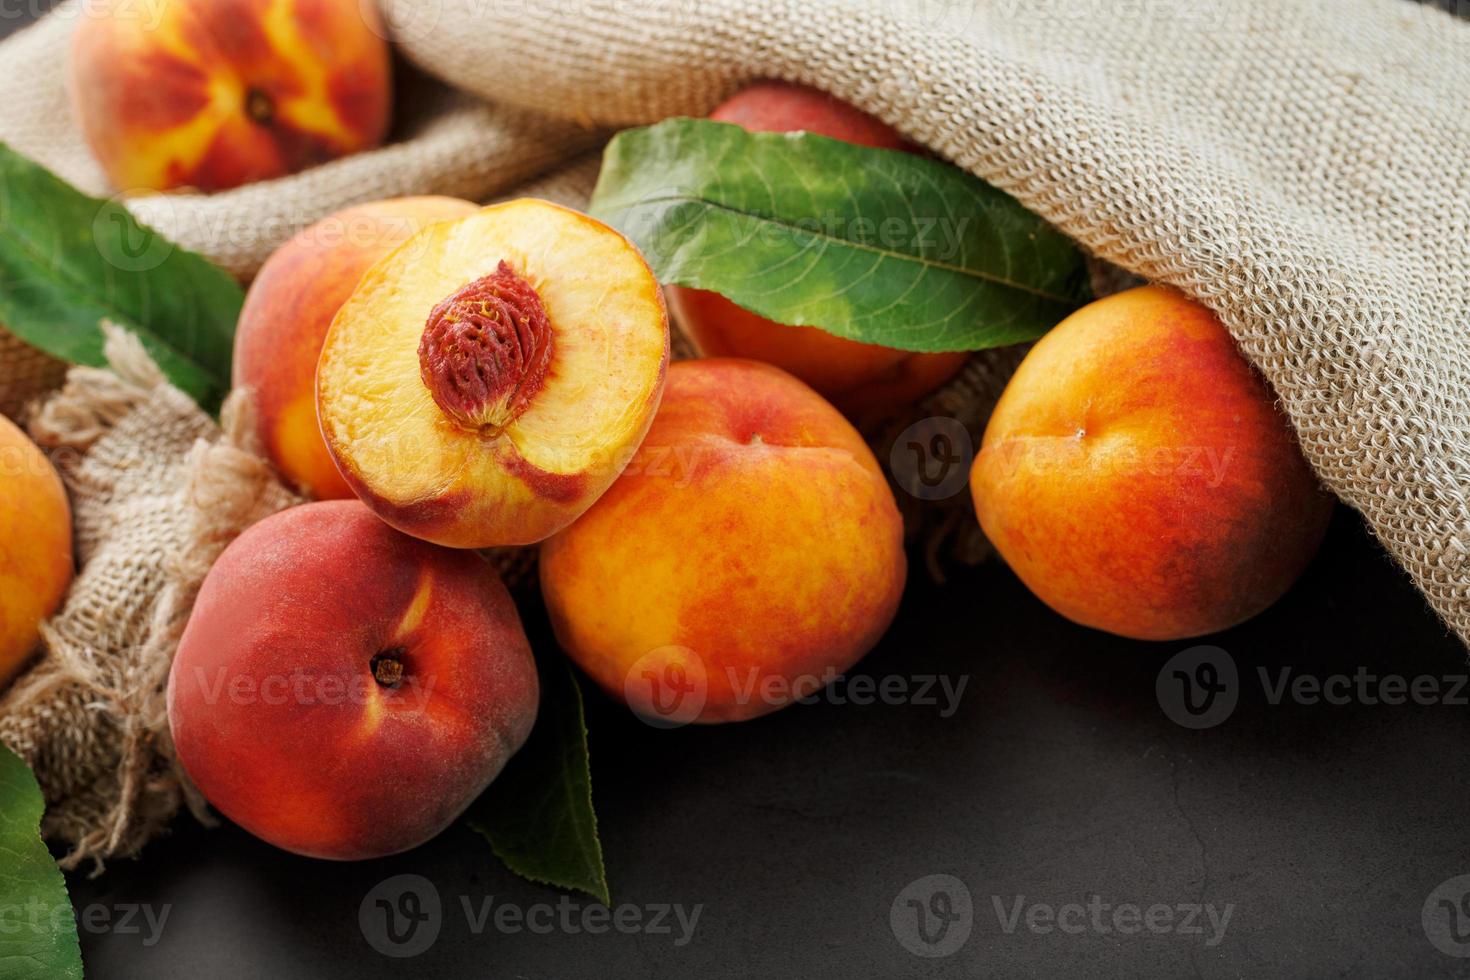 Peaches on a black background with burlap fabric and green leaves. Sweet and juicy peach slices with a stone photo